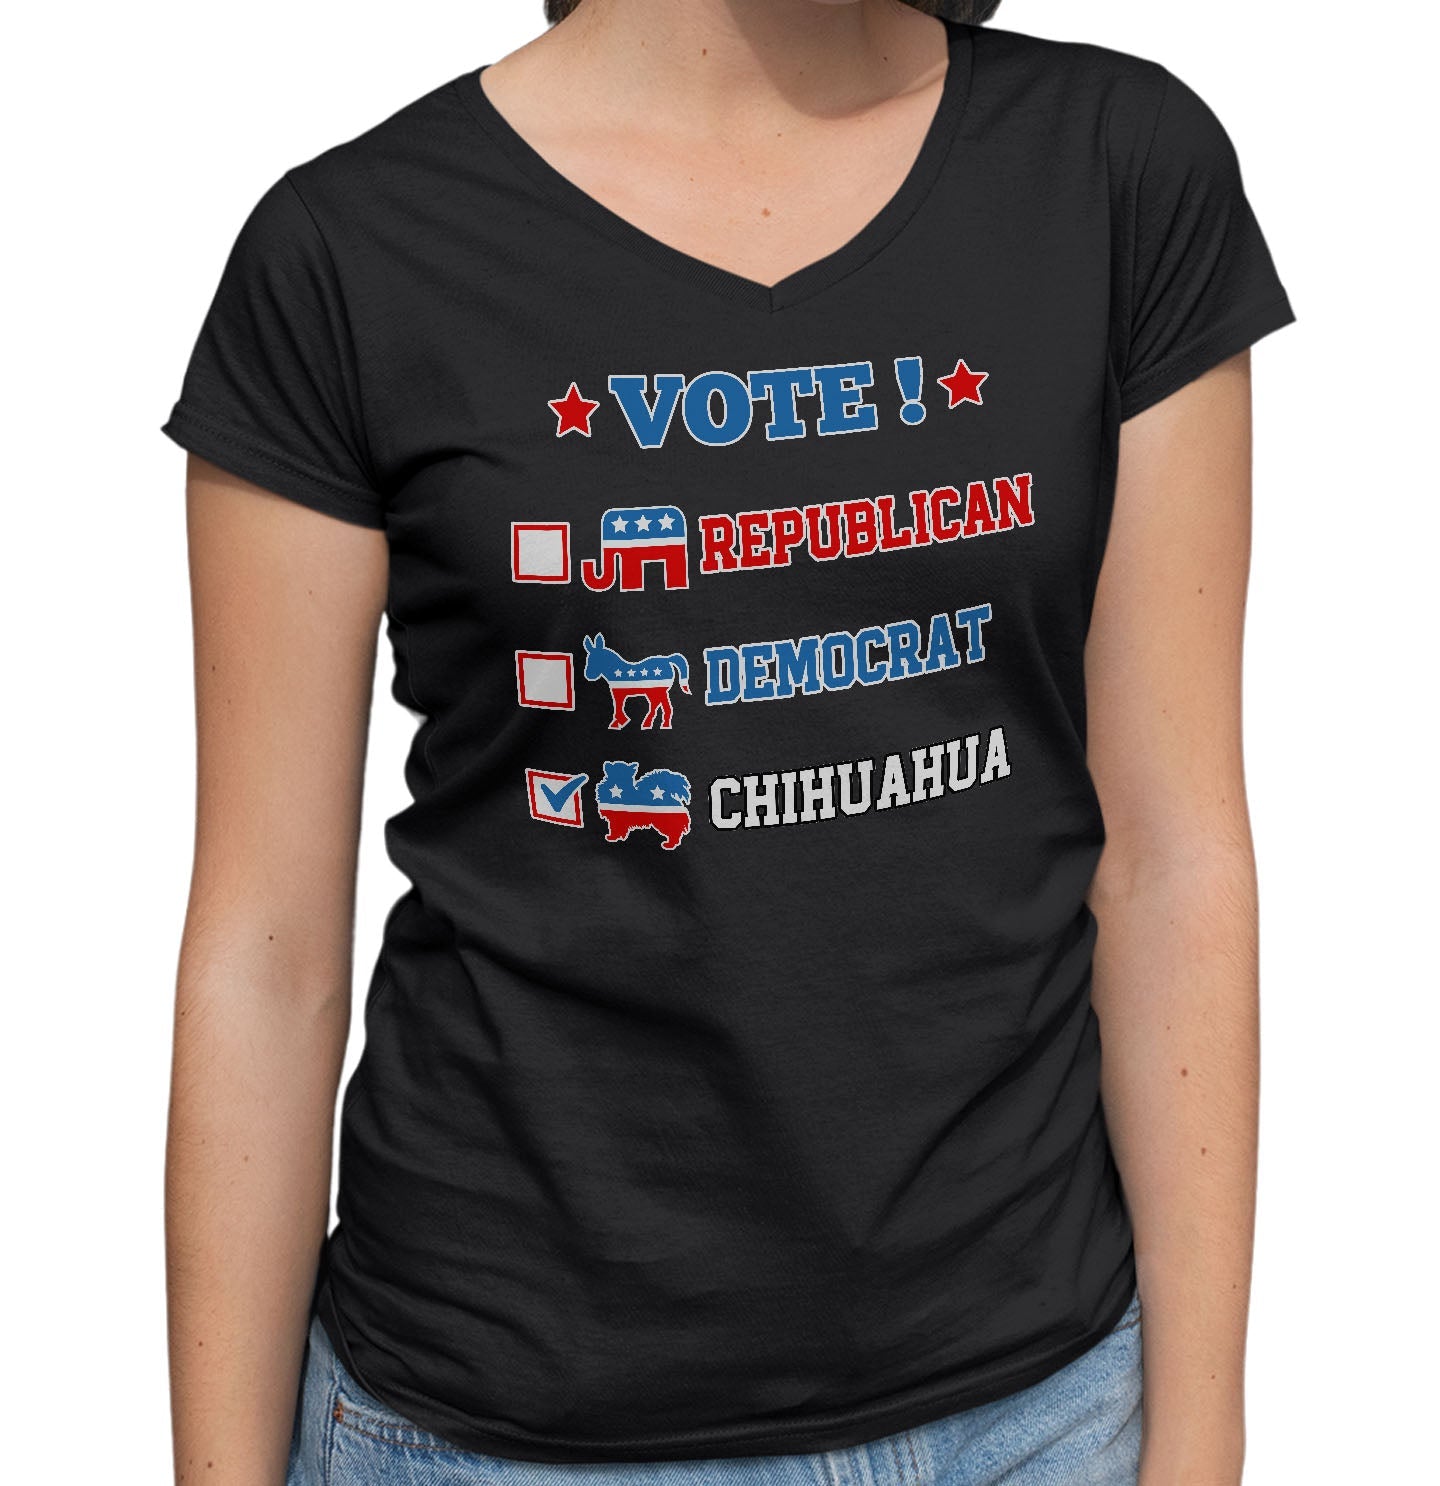 Vote for the Chihuahua (Long-Haired) - Women's V-Neck T-Shirt